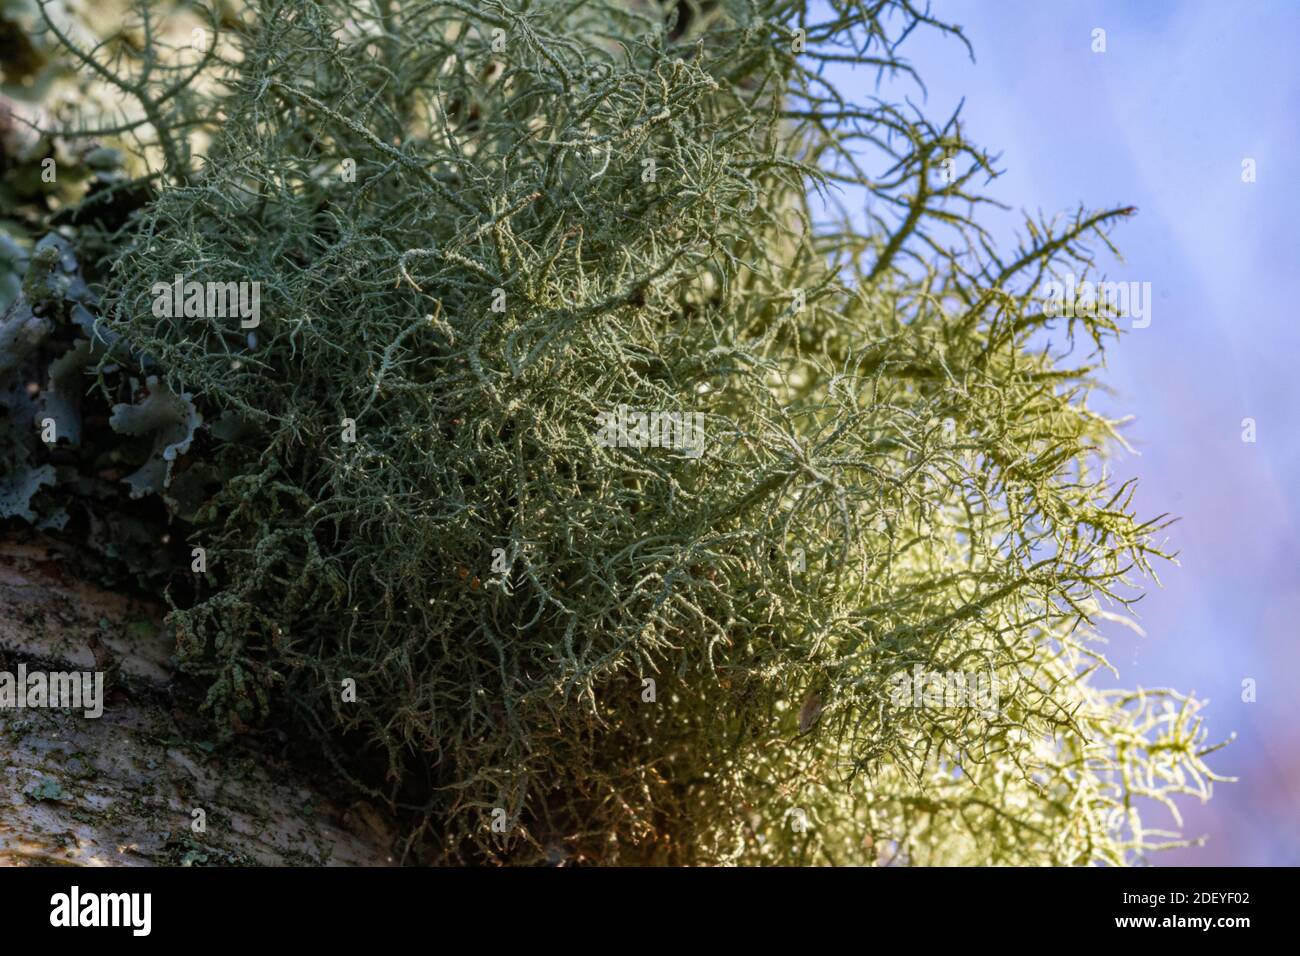 Macro Detail of Beard Lichen (Usnea subfloridana) Growing on a Tree Trunk with Foliose LichenI Indicating No Pollution. Stock Photo